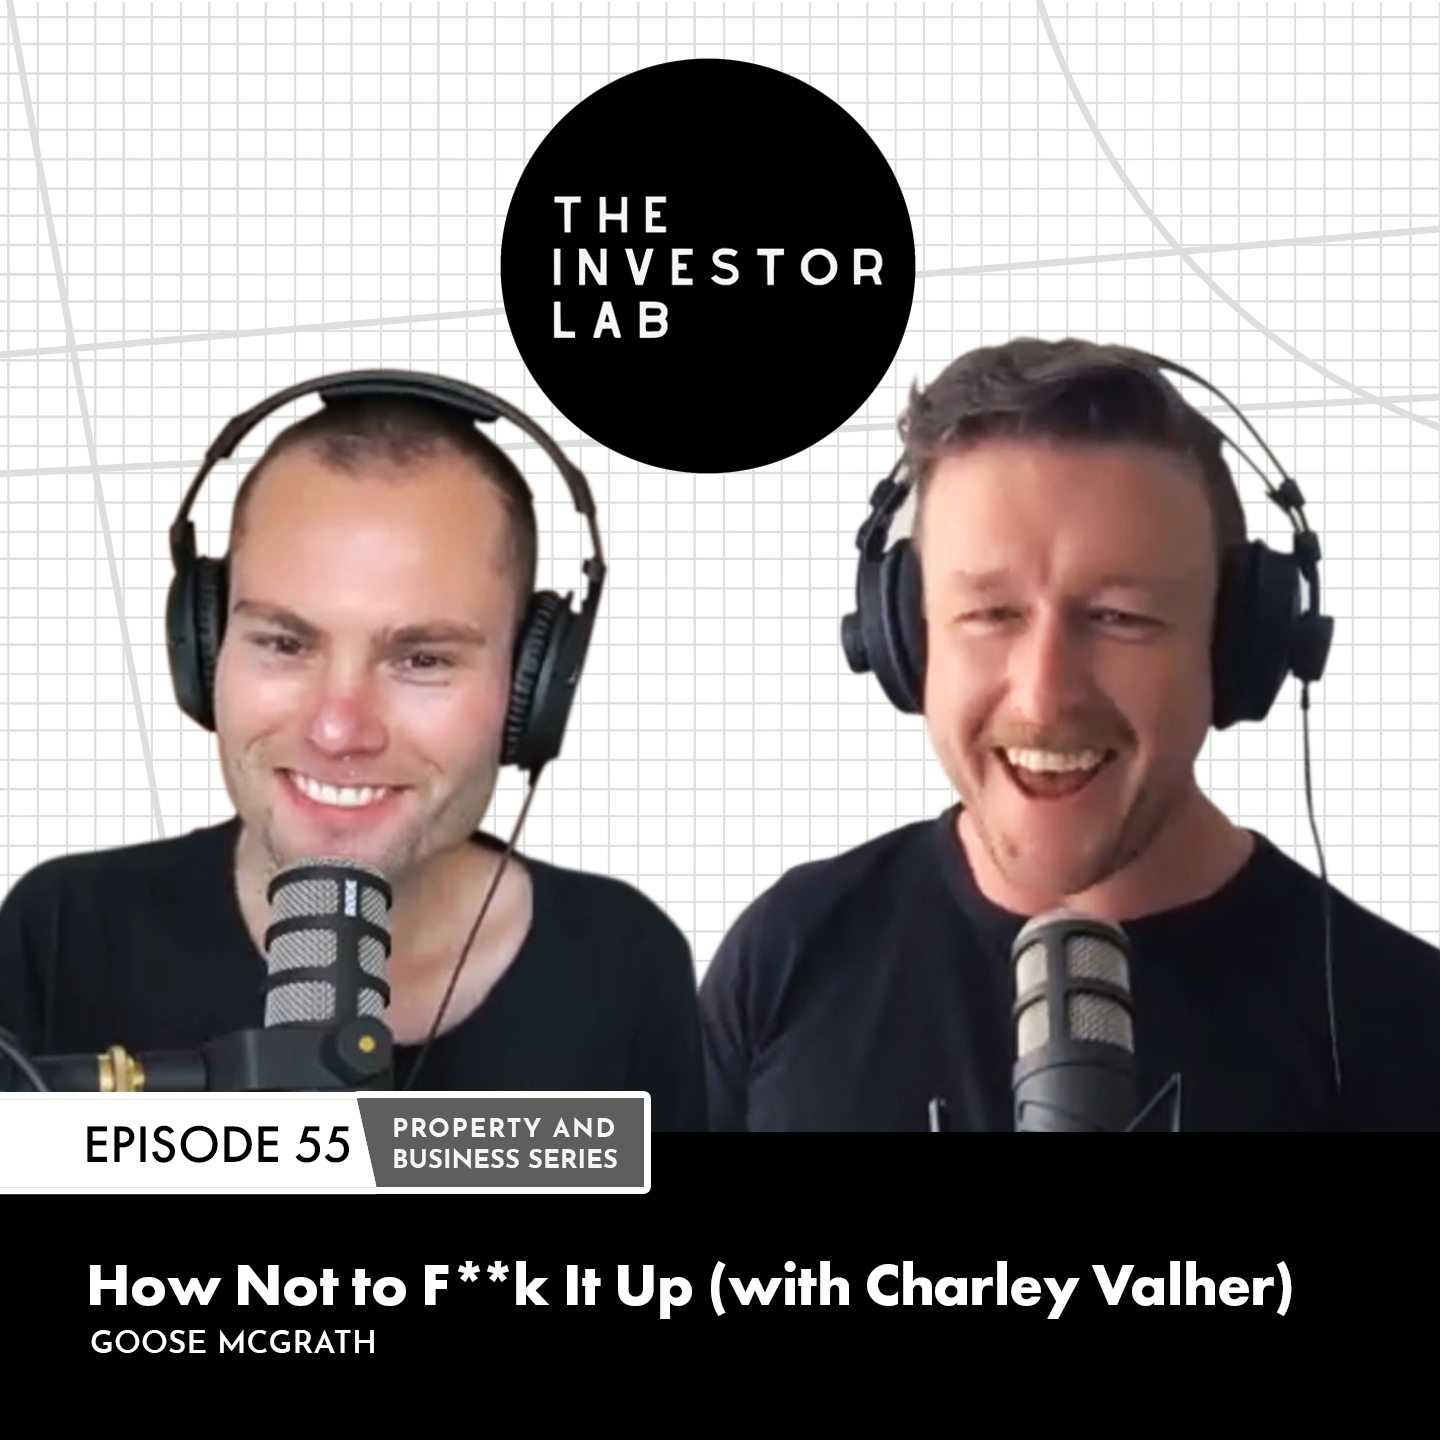 How Not to F**k It Up (with Charley Valher)